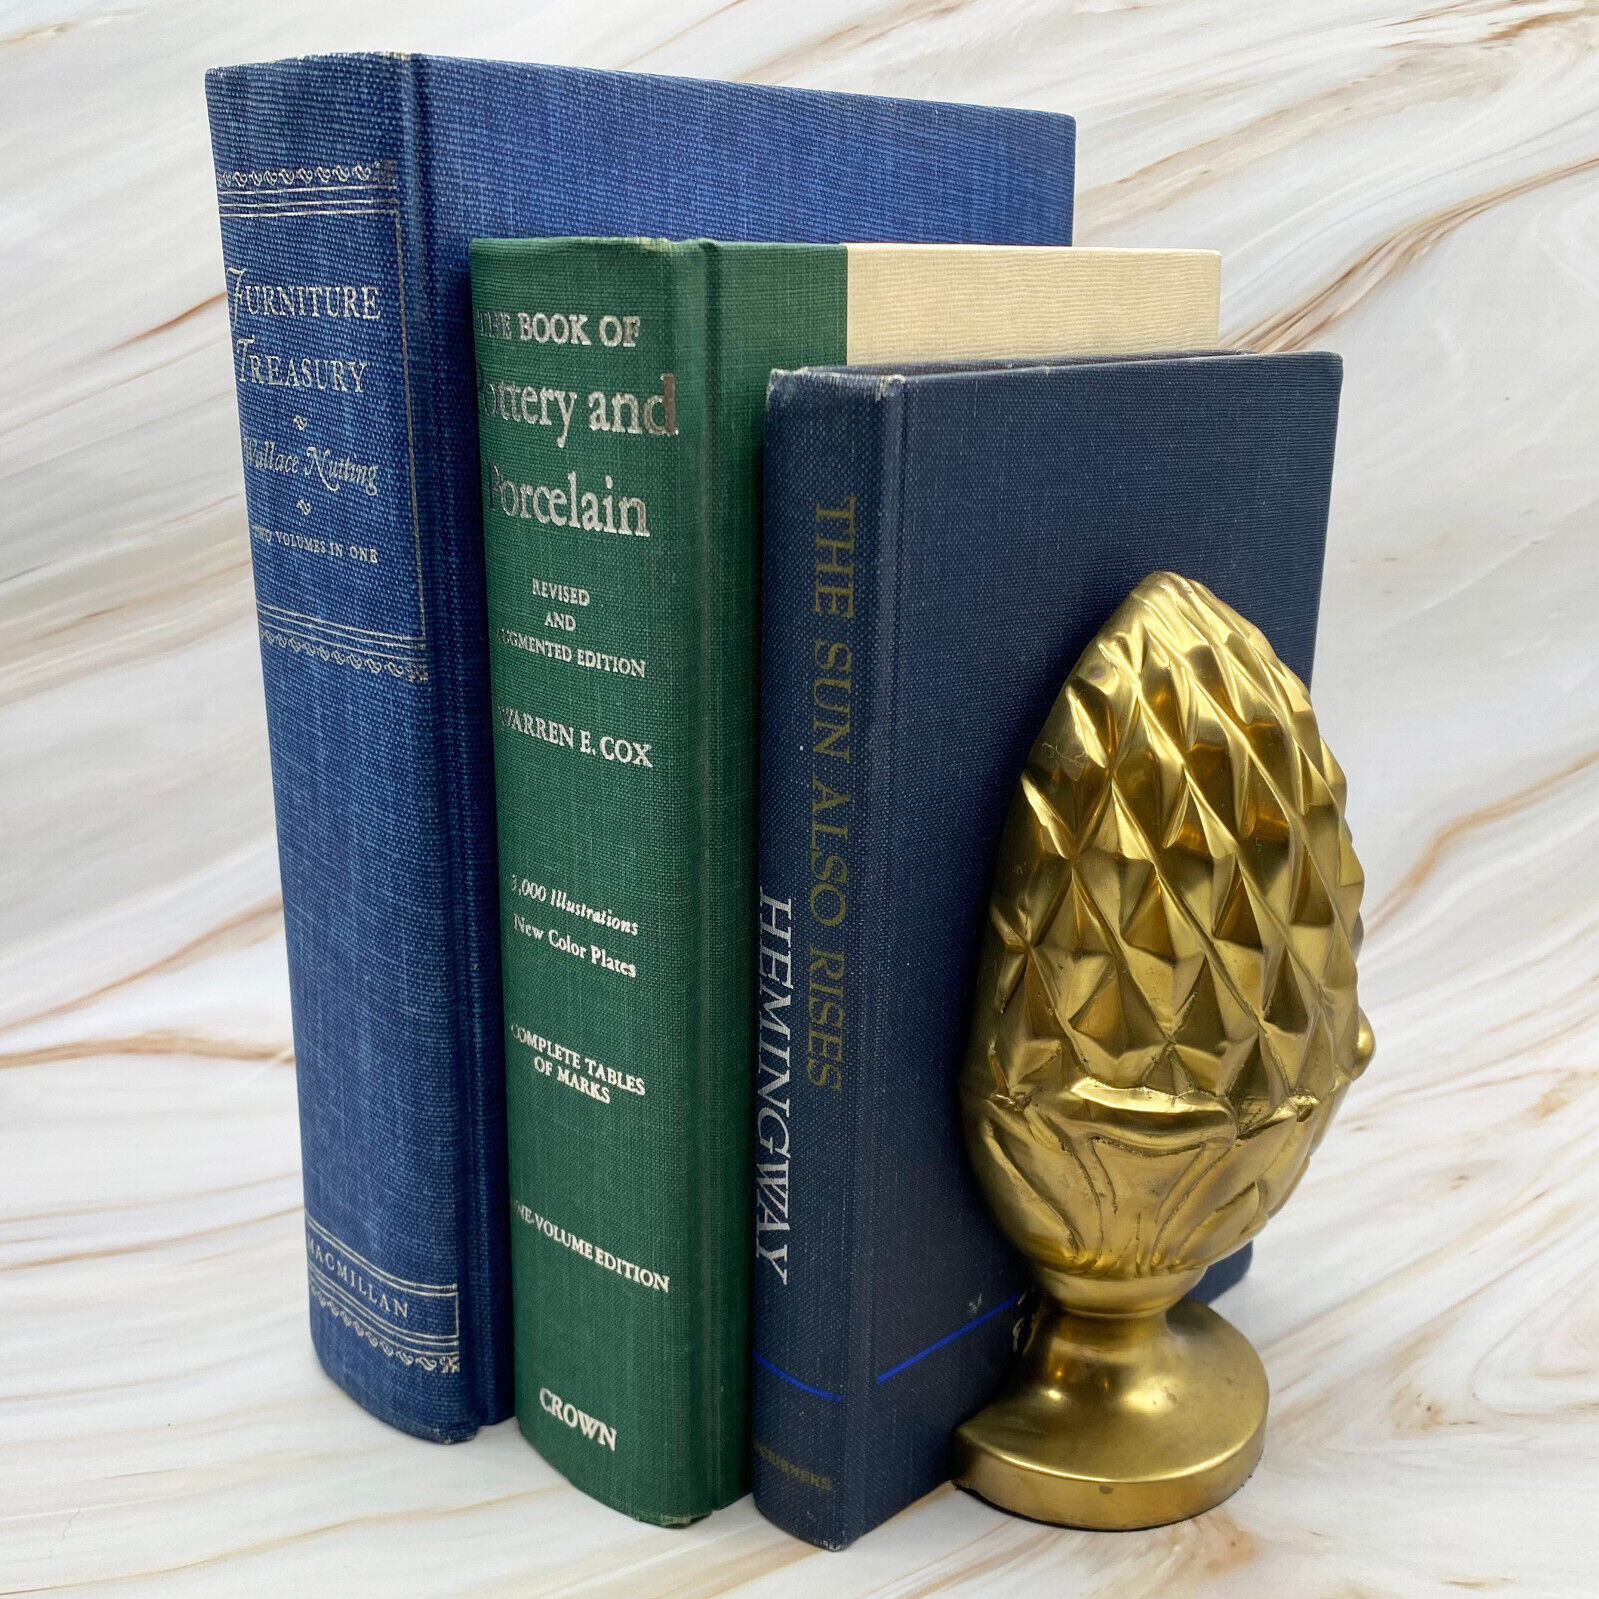 Vintage Pineapple Solid Brass Bookend or Door Stop - Faceted Diamond Pattern